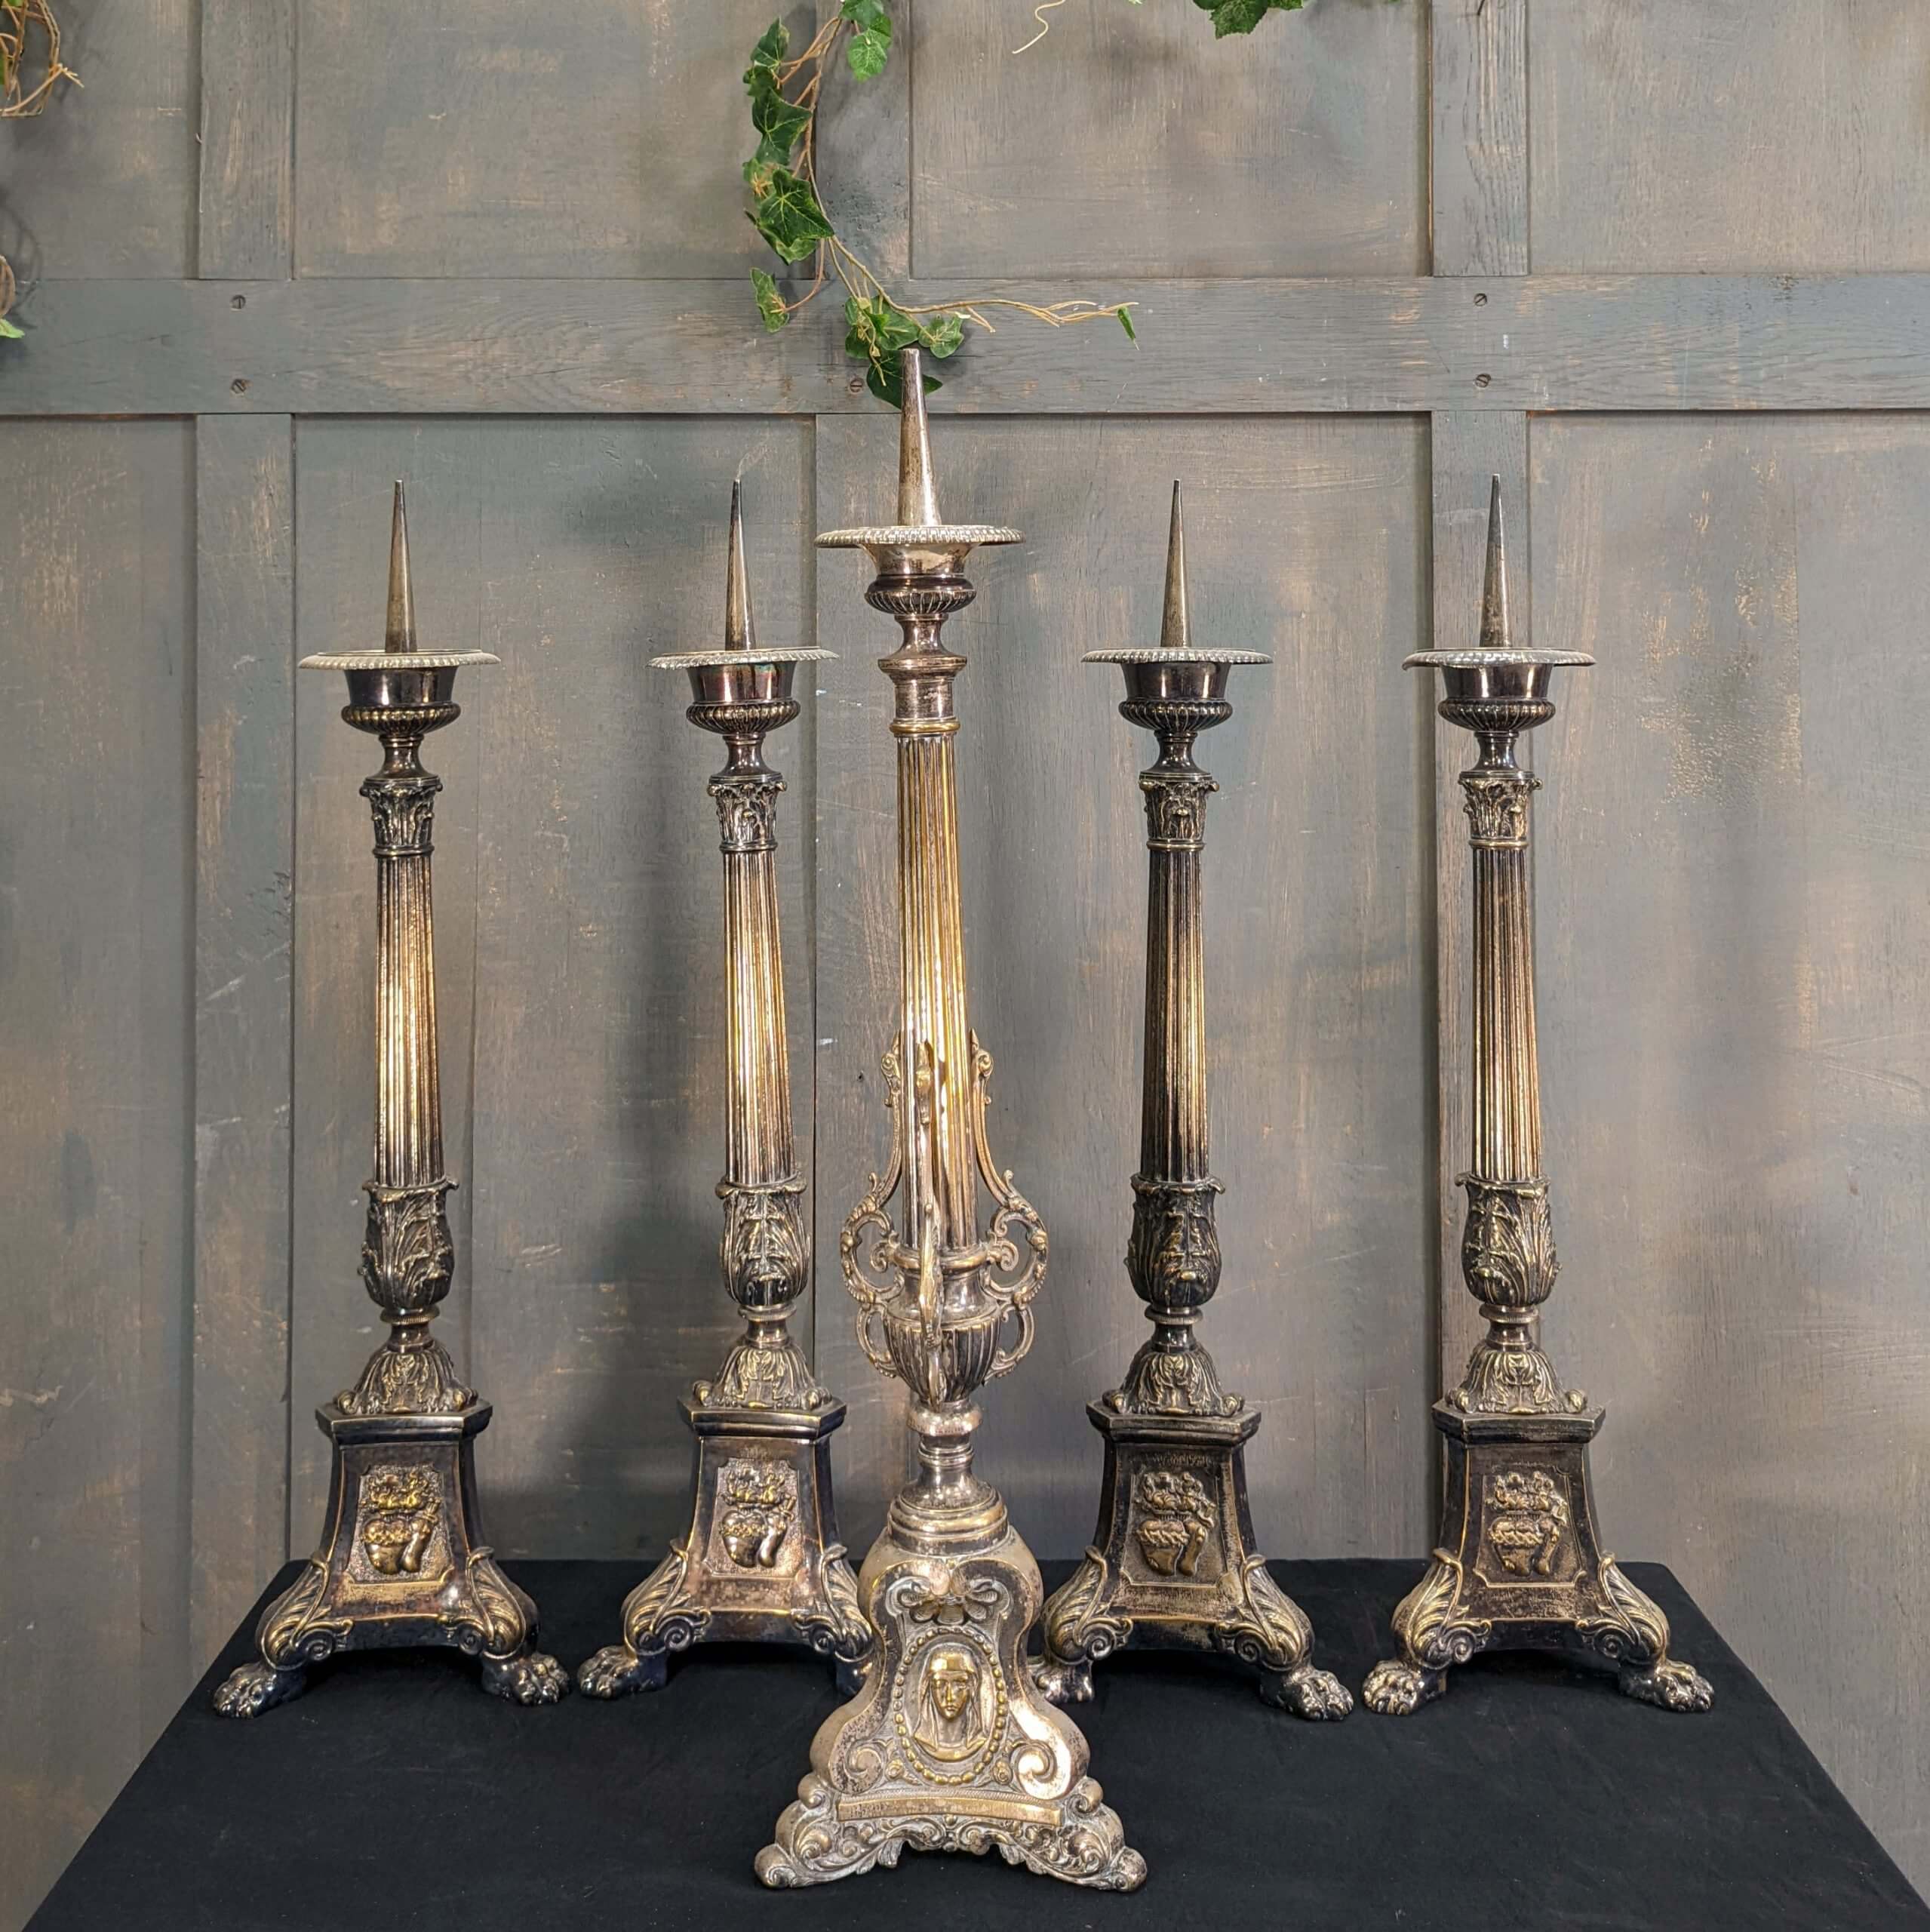 A pair of Church Alter candle sticks